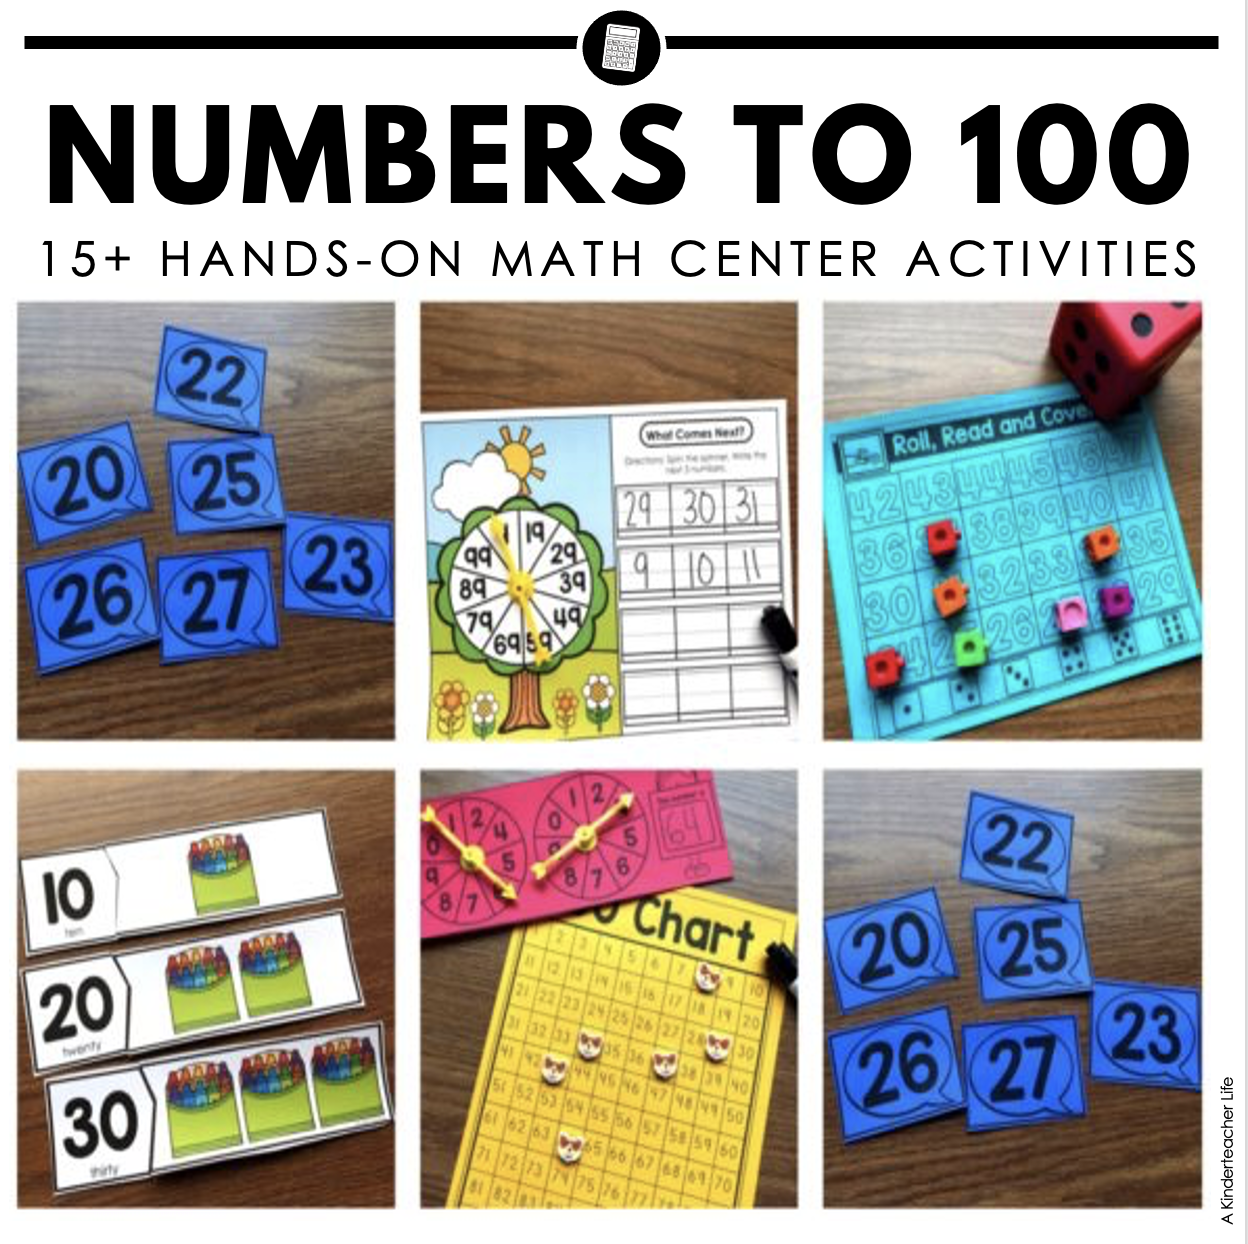 Patterns Primary Teacher Math's Resource Set of 100 Counting Counting Links 